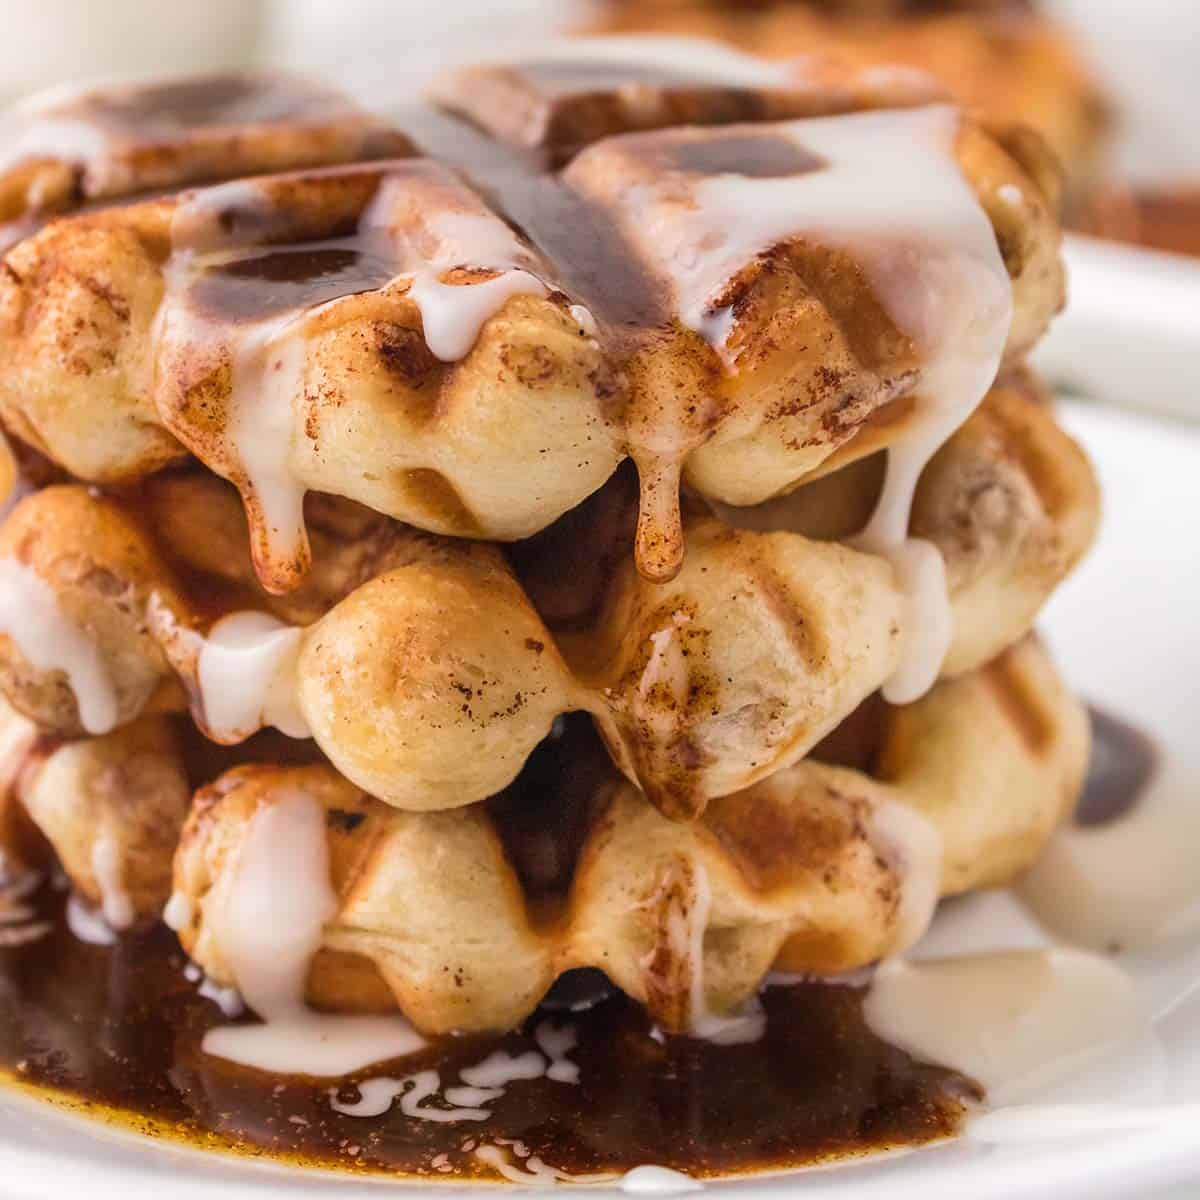 Mini Cinnamon Roll Waffles (+Video) - The Country Cook